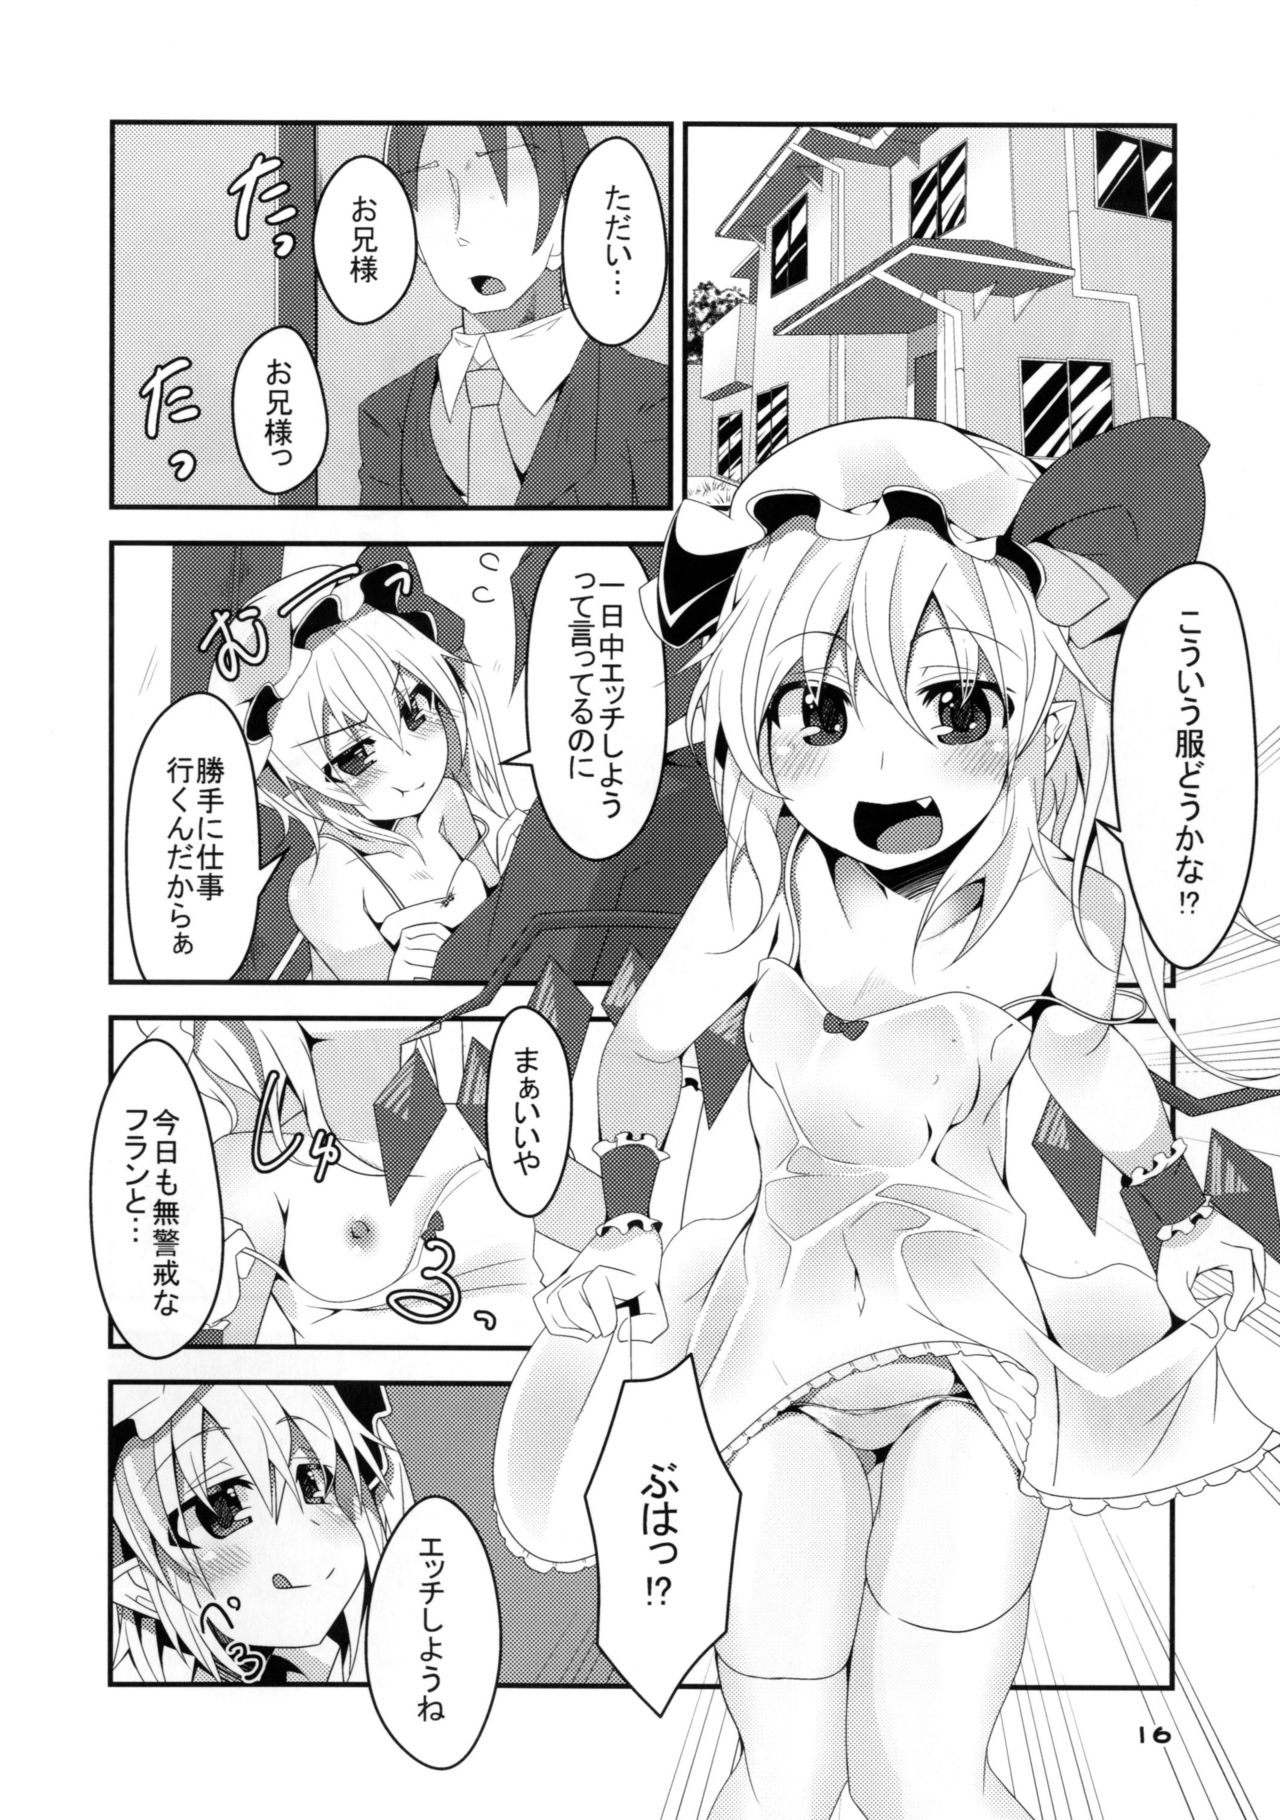 [Angelic Feather (Land Sale)] FLAN-CHAN COOL BIZ (Touhou Project) [Digital] page 15 full